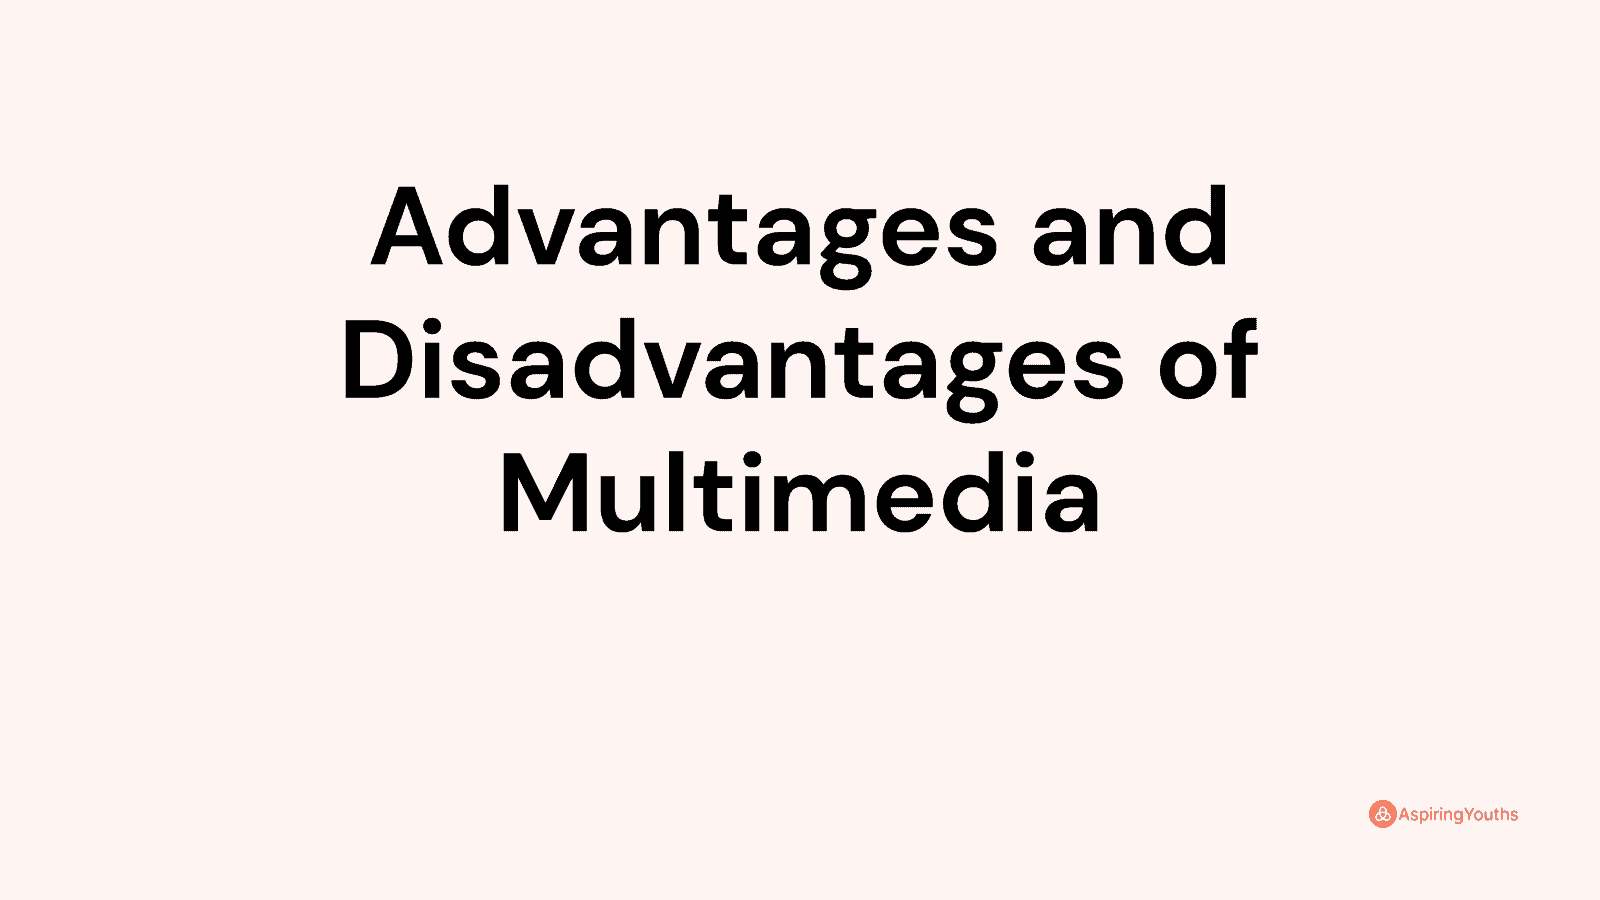 Advantages and disadvantages of Multimedia